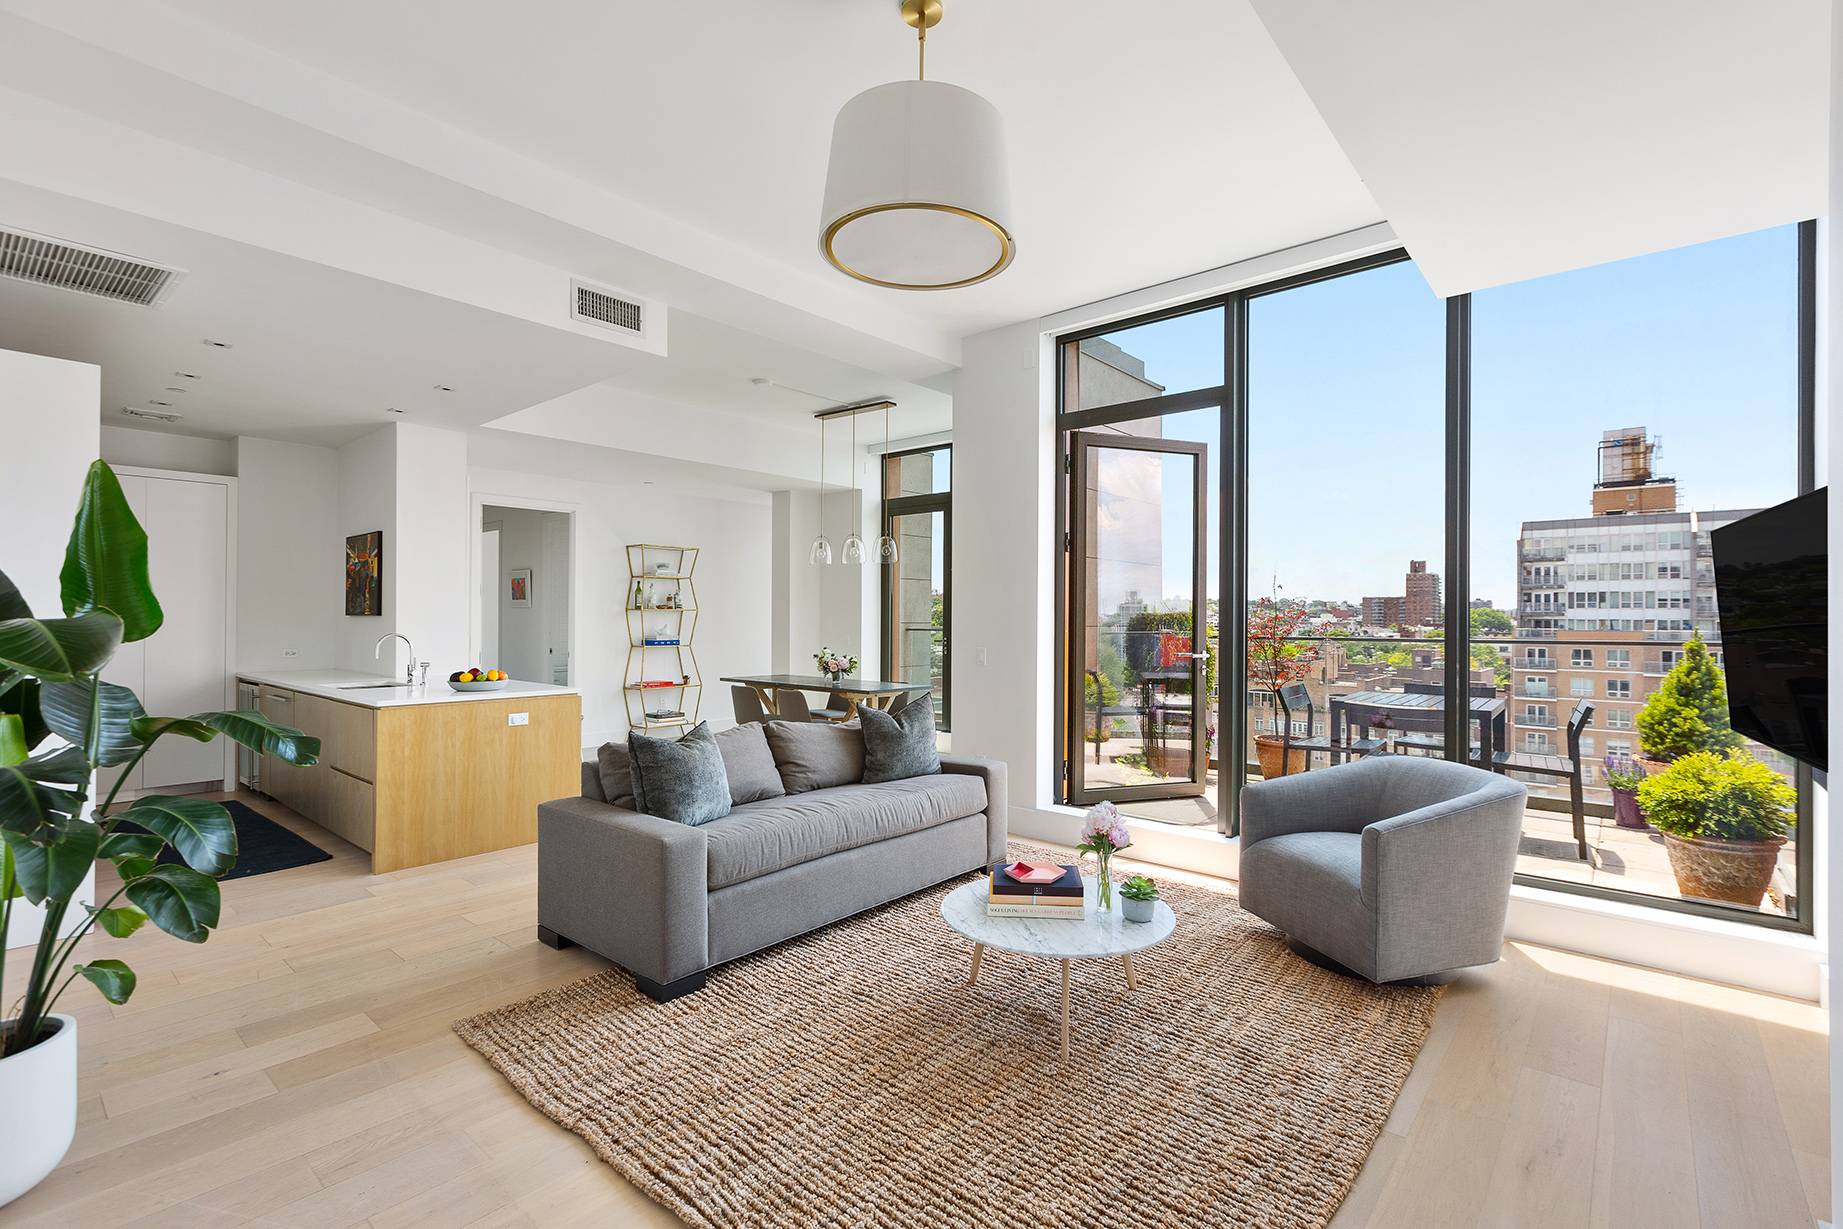 Style and luxury come together in this truly stunning Tribeca style penthouse situated in a prime Park Slope location.